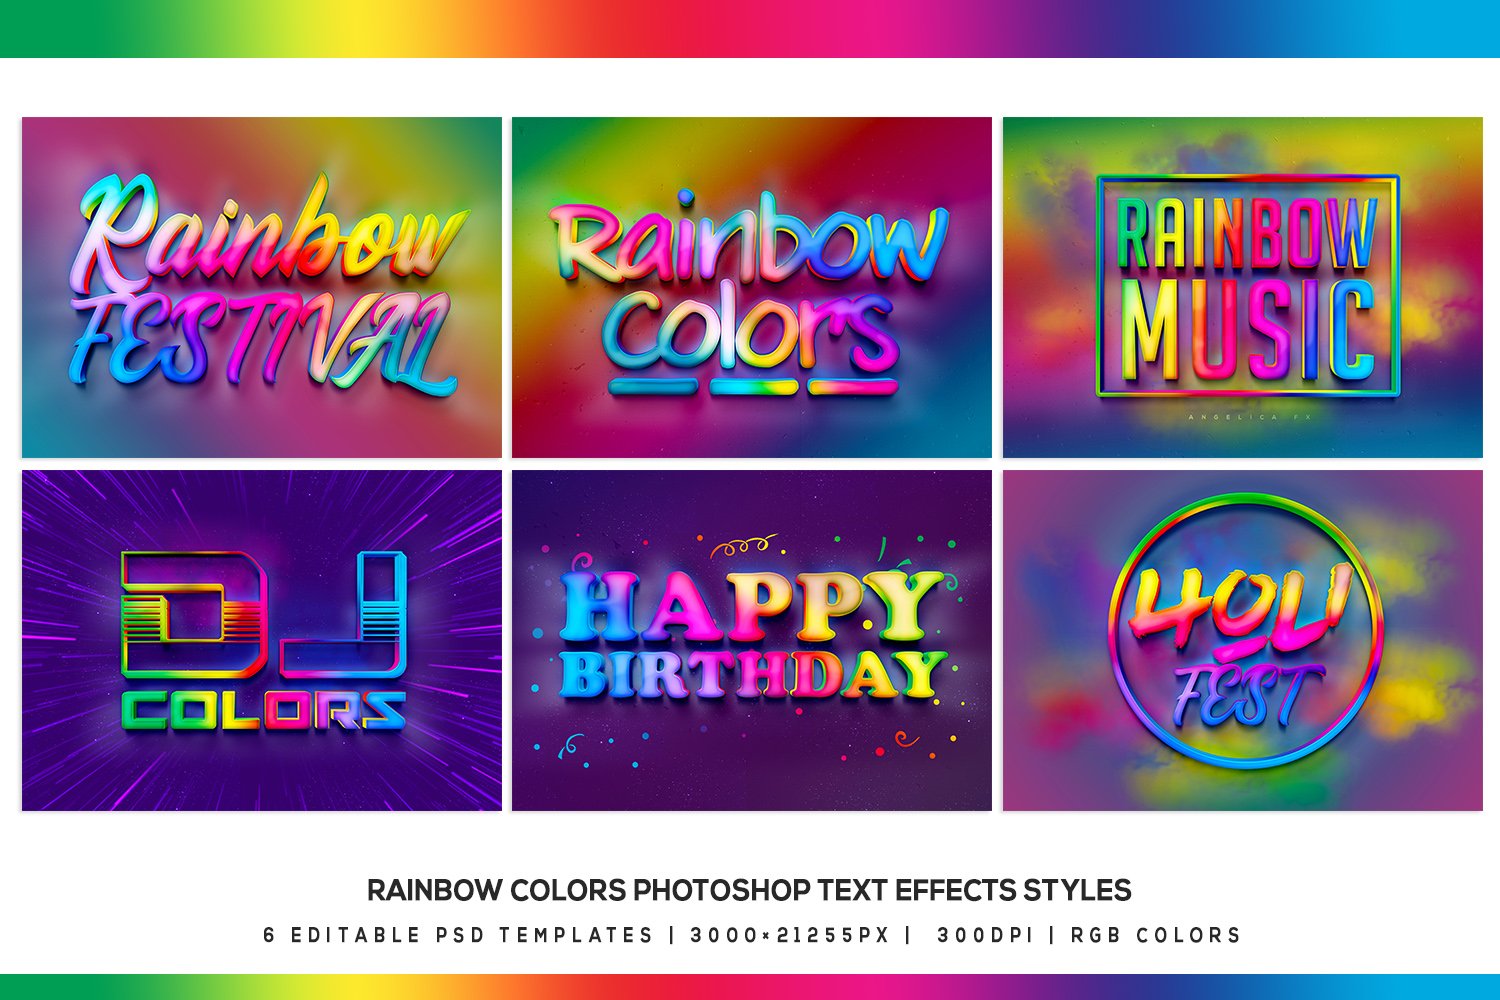 Rainbow Colors Photoshop Text Effectcover image.